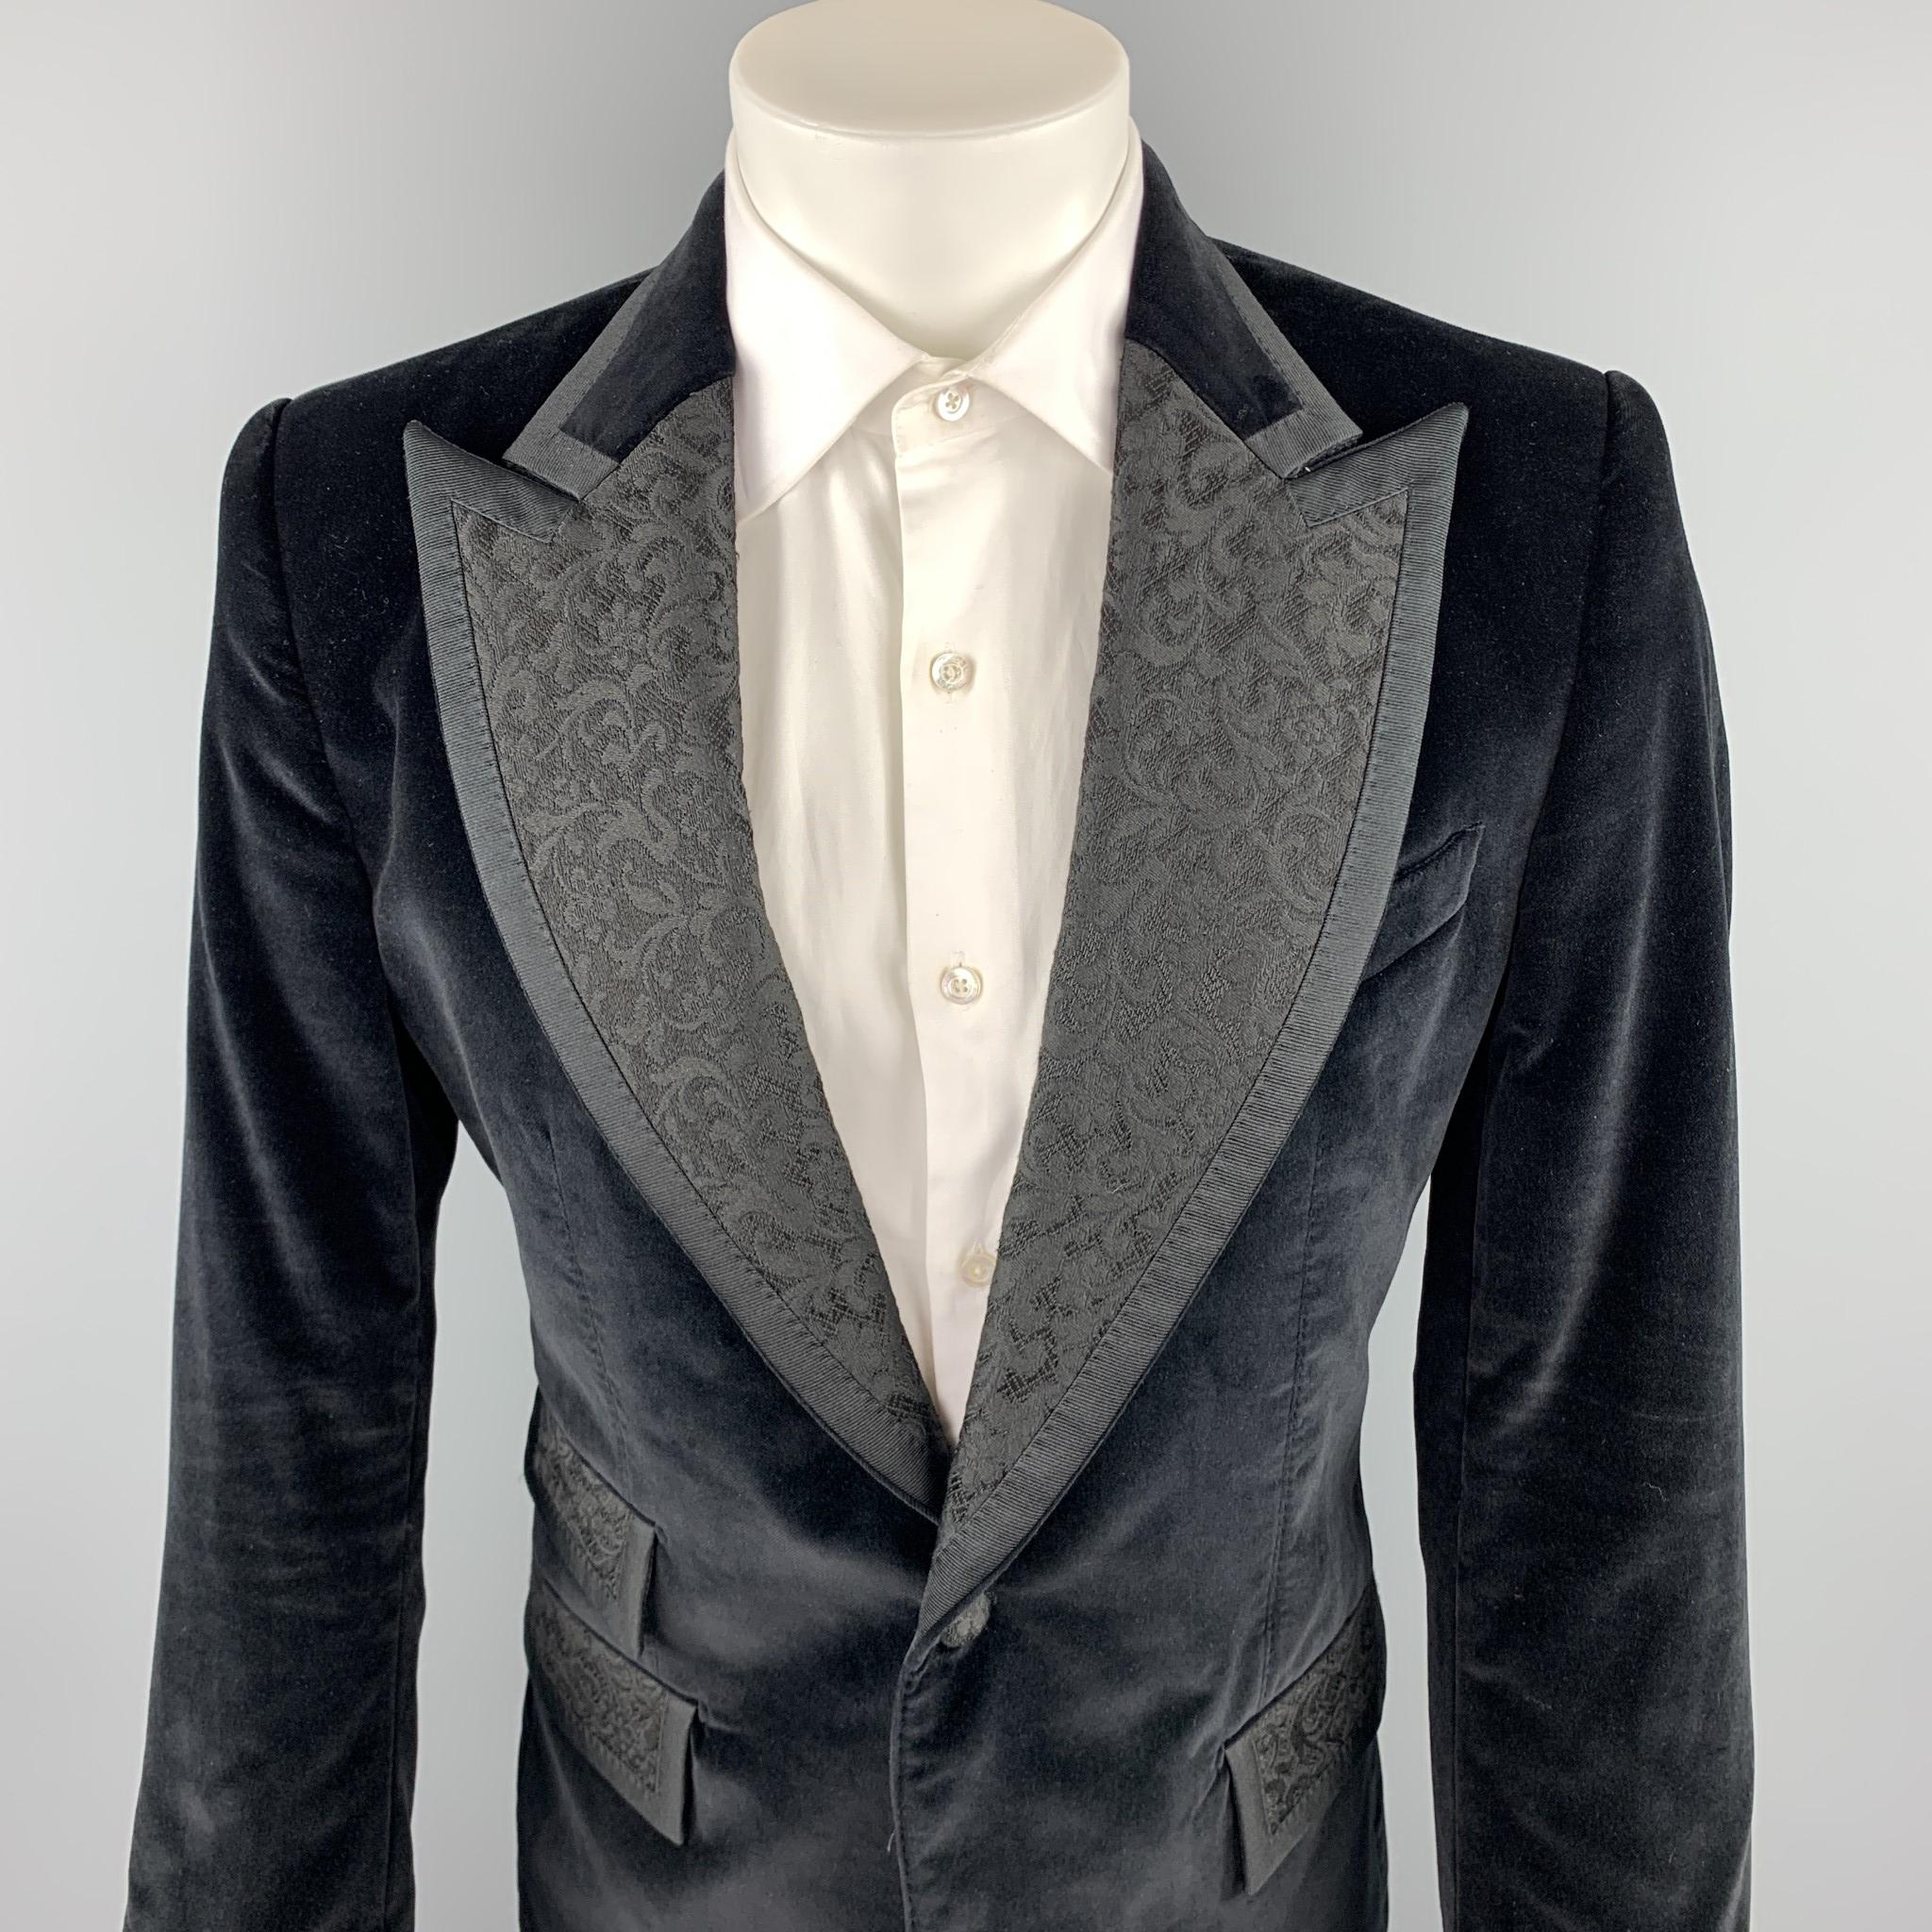 DOLCE & GABBANA sport coat comes in a black velvet with a full black liner featuring a jacquard peak lapel, flap pockets, and a single button closure. Made in Italy.

Excellent Pre-Owned Condition.
Marked: IT 50

Measurements:

Shoulder: 18 in.